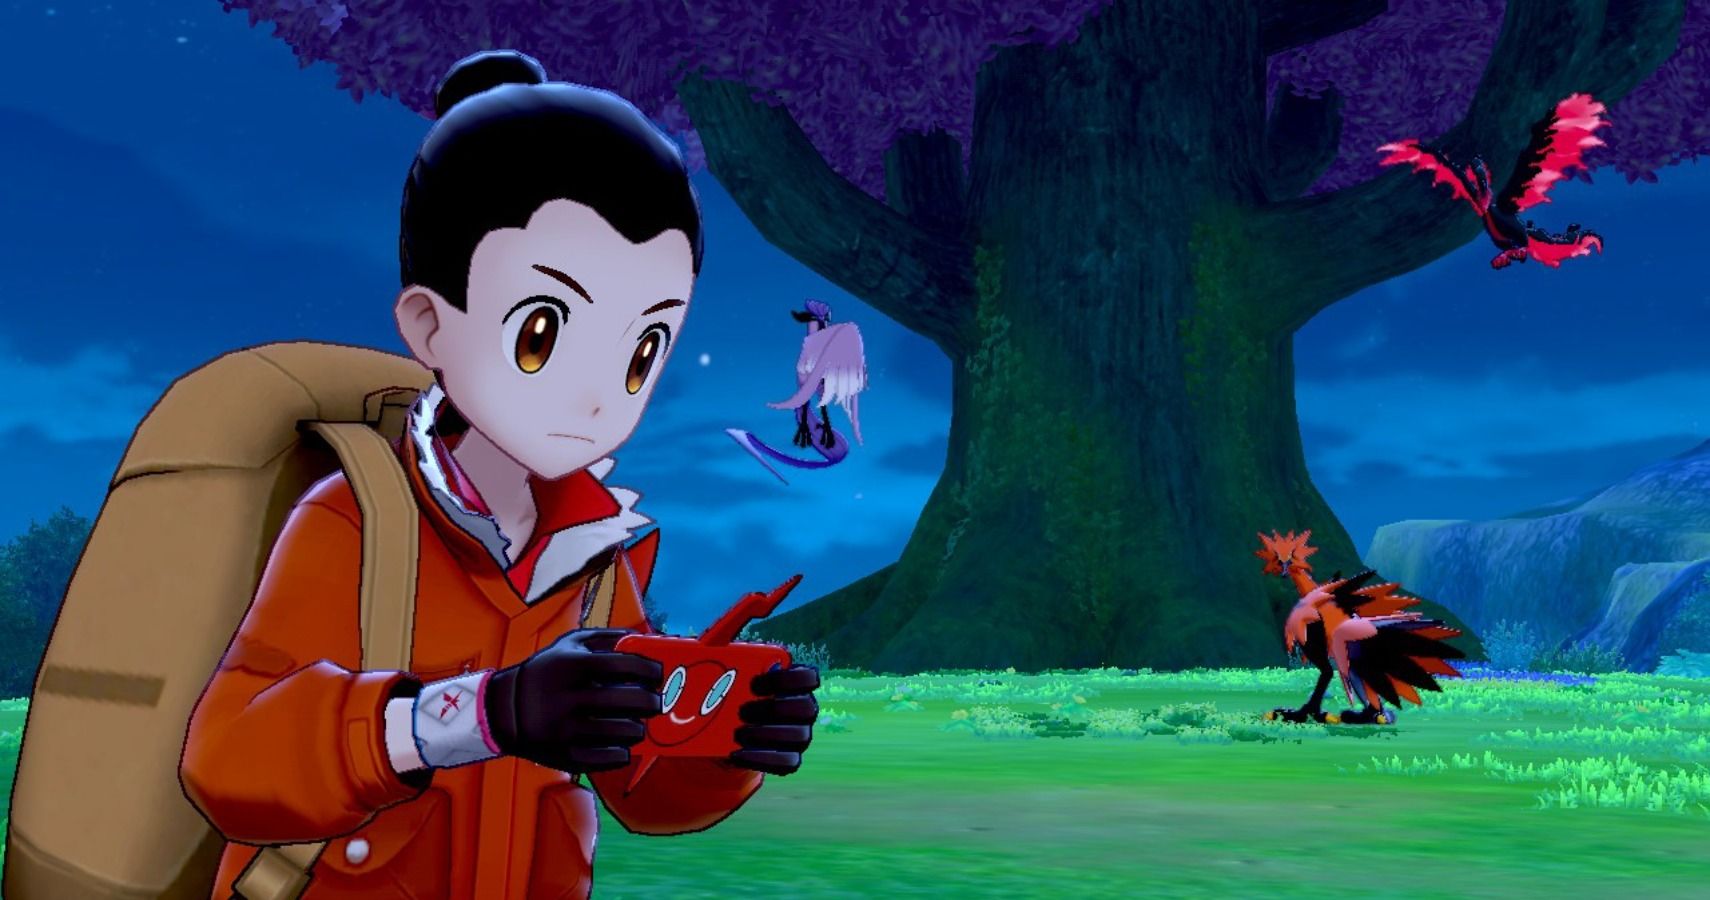 Pokémon Sword and Shield: Isle of Armor review - The Verge